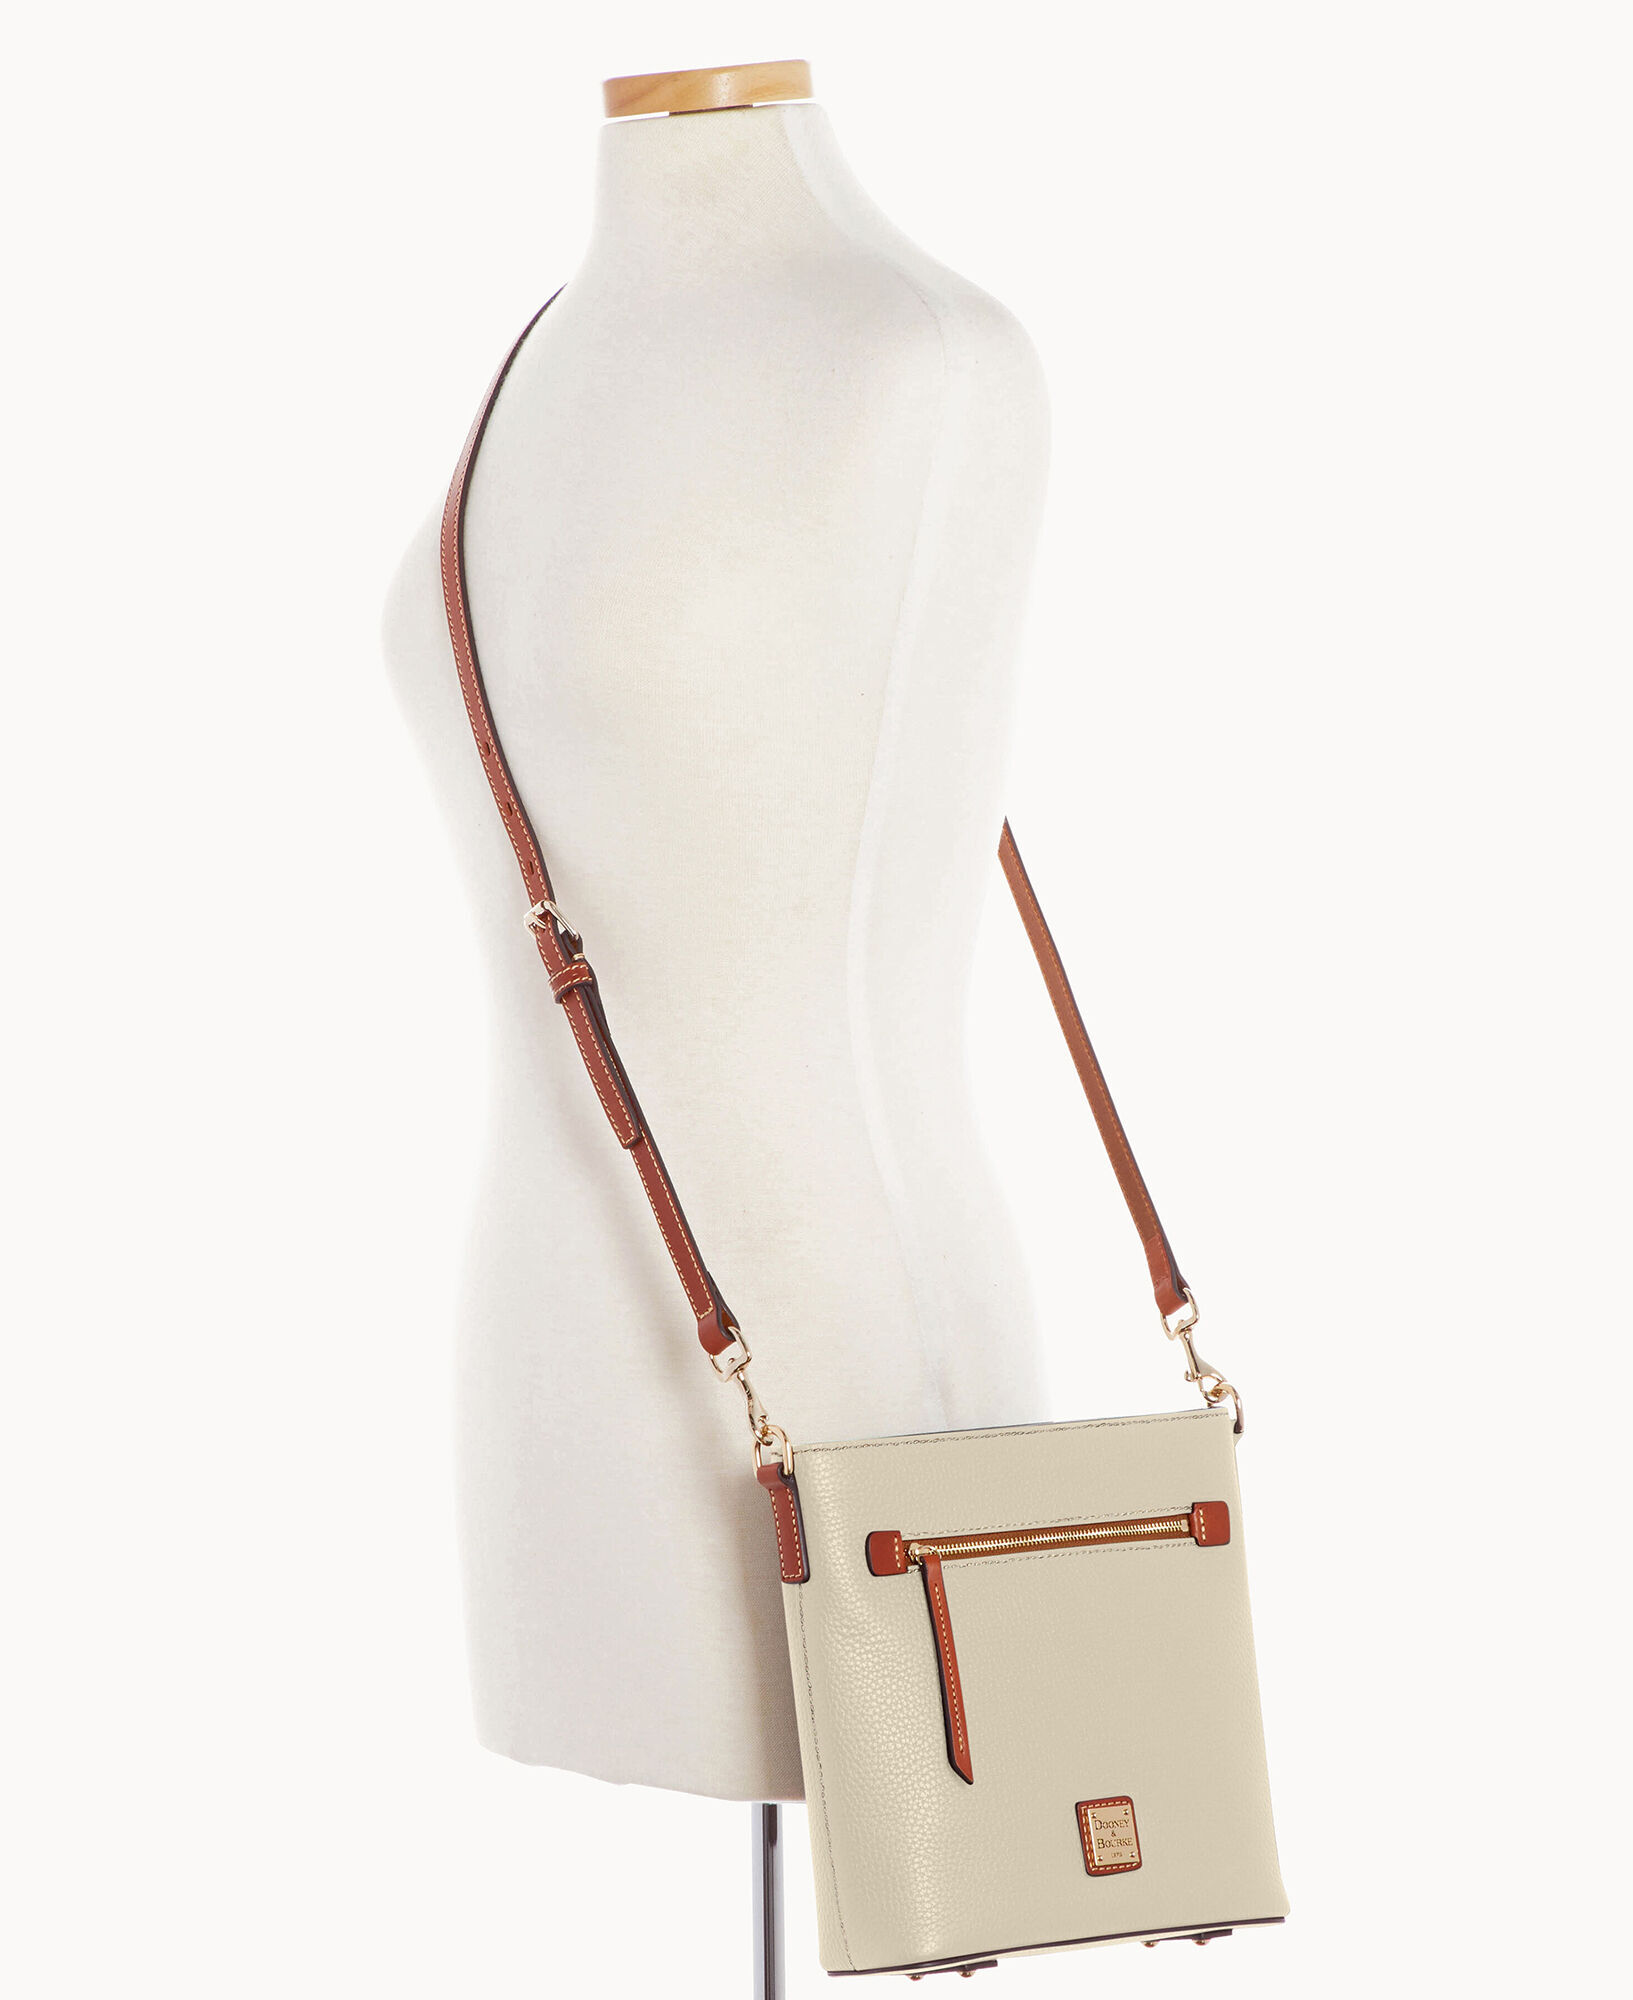 Dooney & Bourke Saffiano Choice of Small or Large Zip Crossbody on